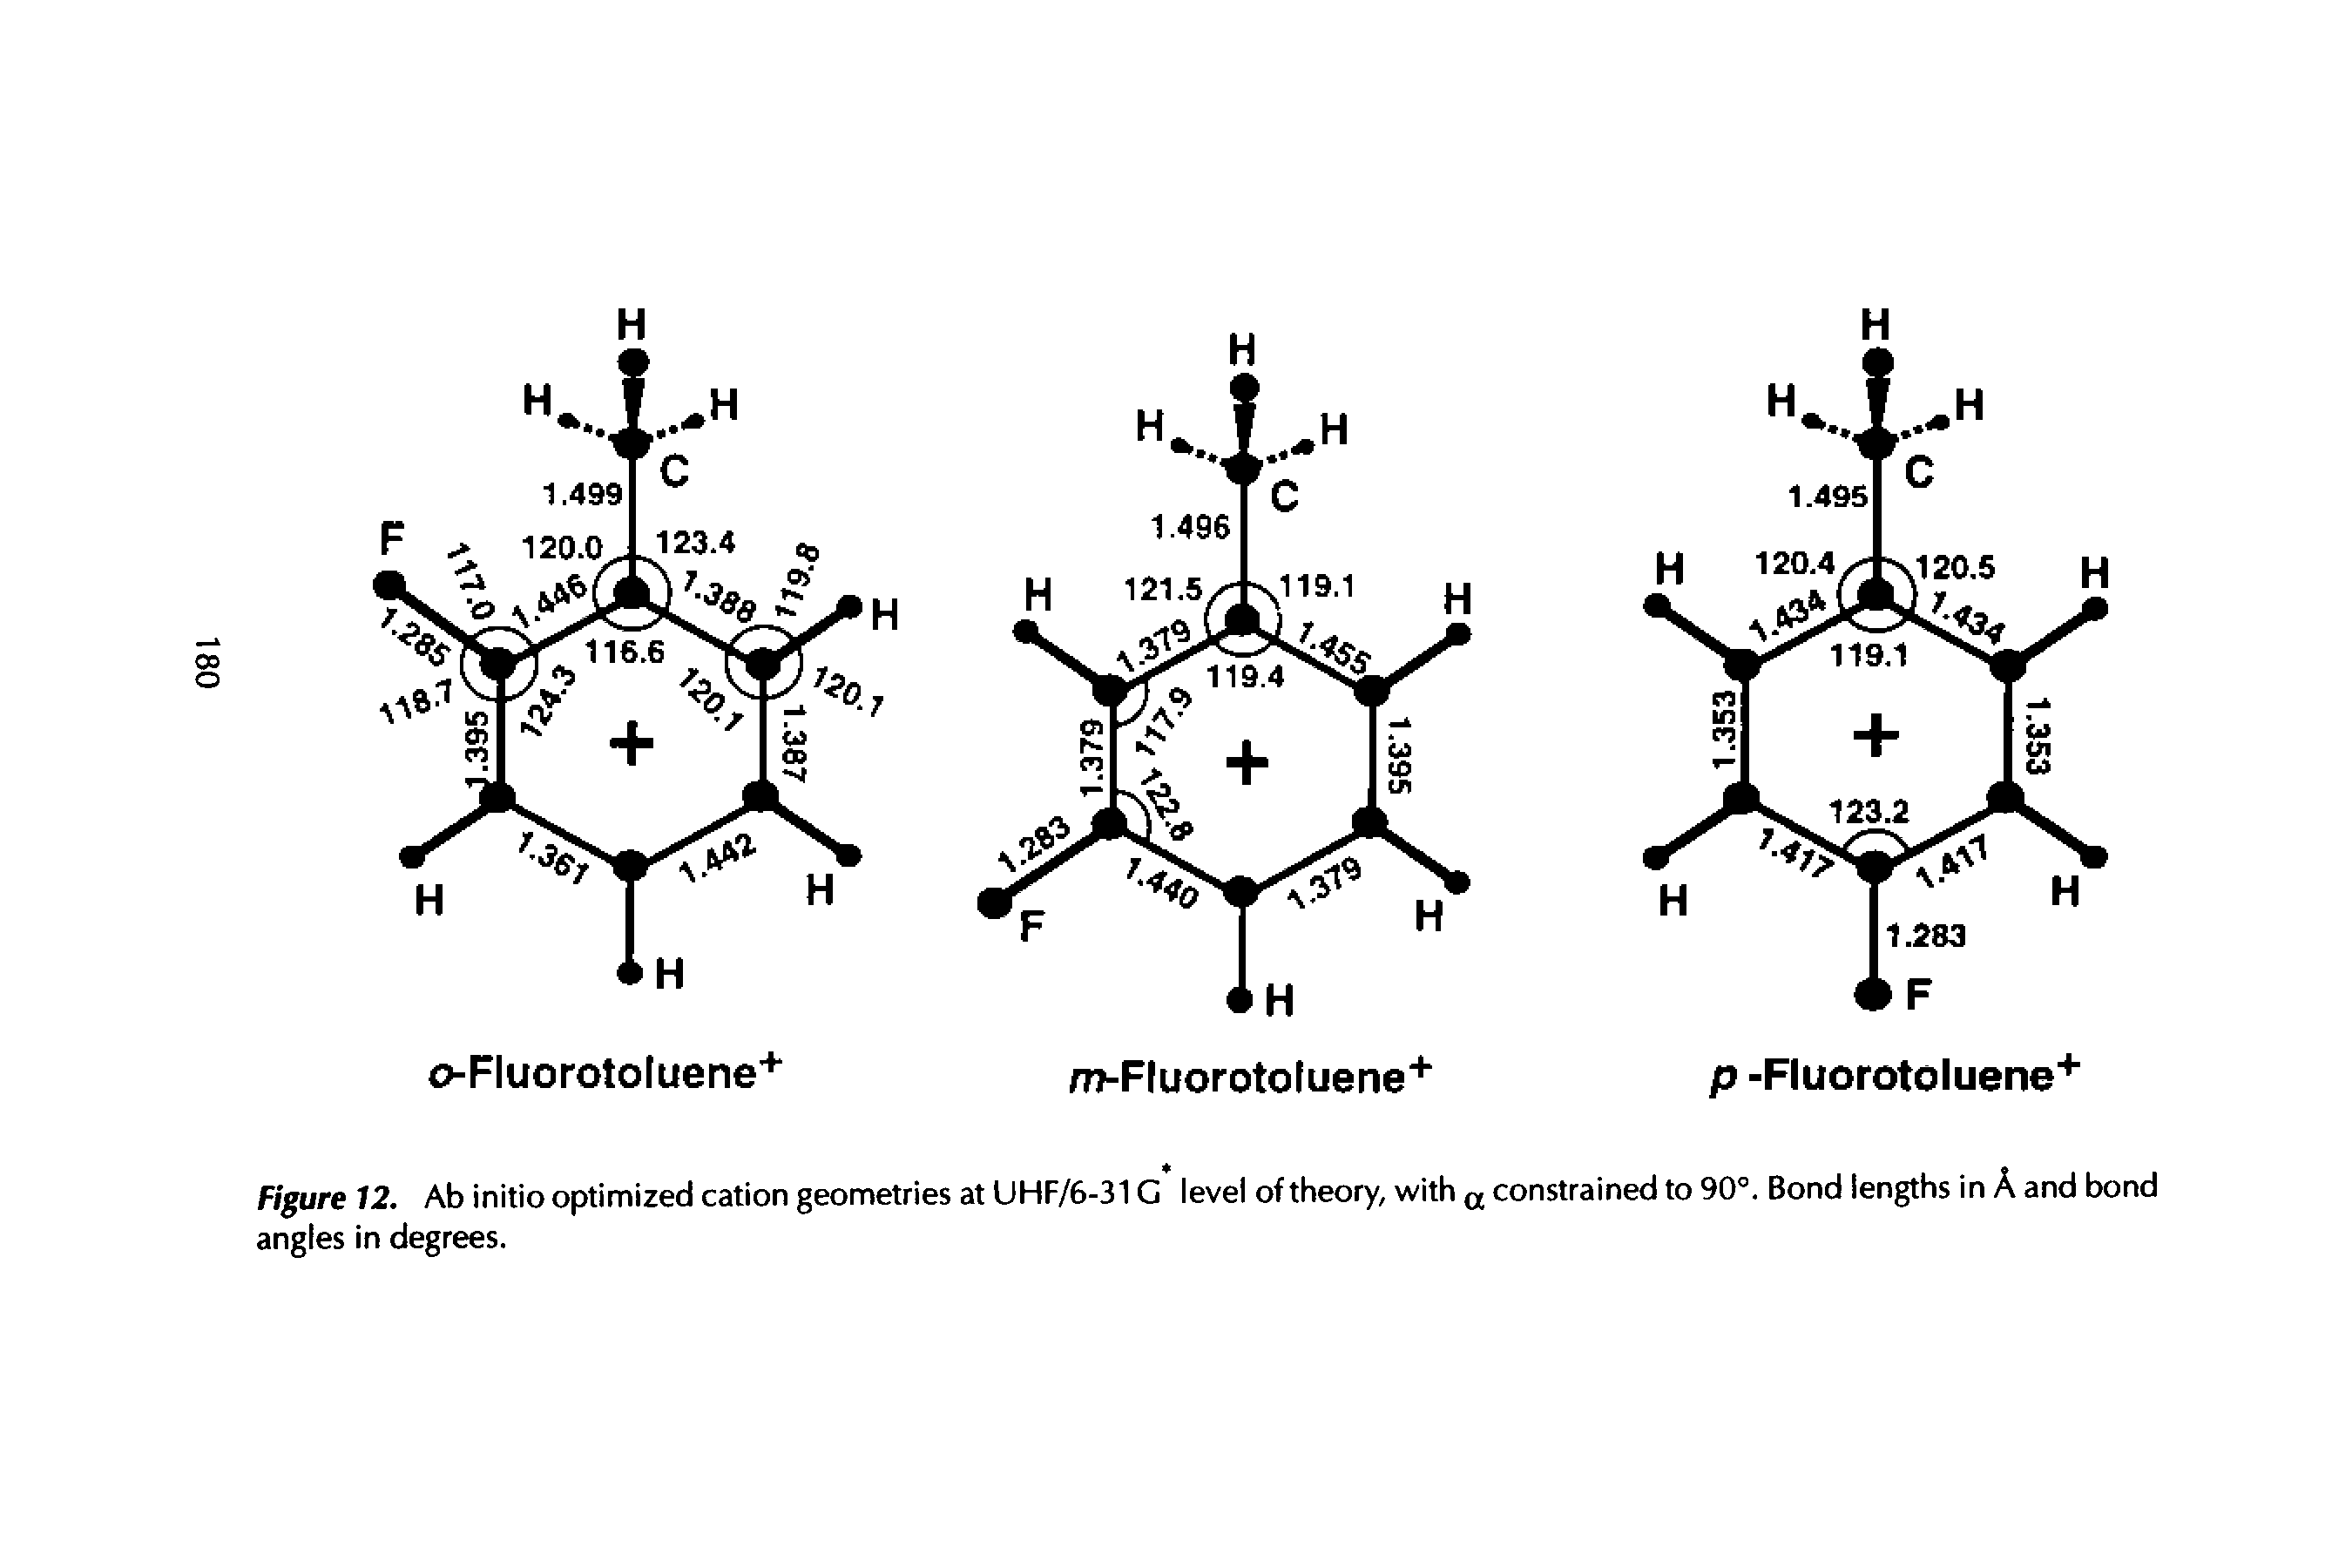 Figure 12. Ab initio optimized cation geometries at UHF/6-31G level of theory, with a constrained to 90°. Bond lengths in A and bond angles in degrees.